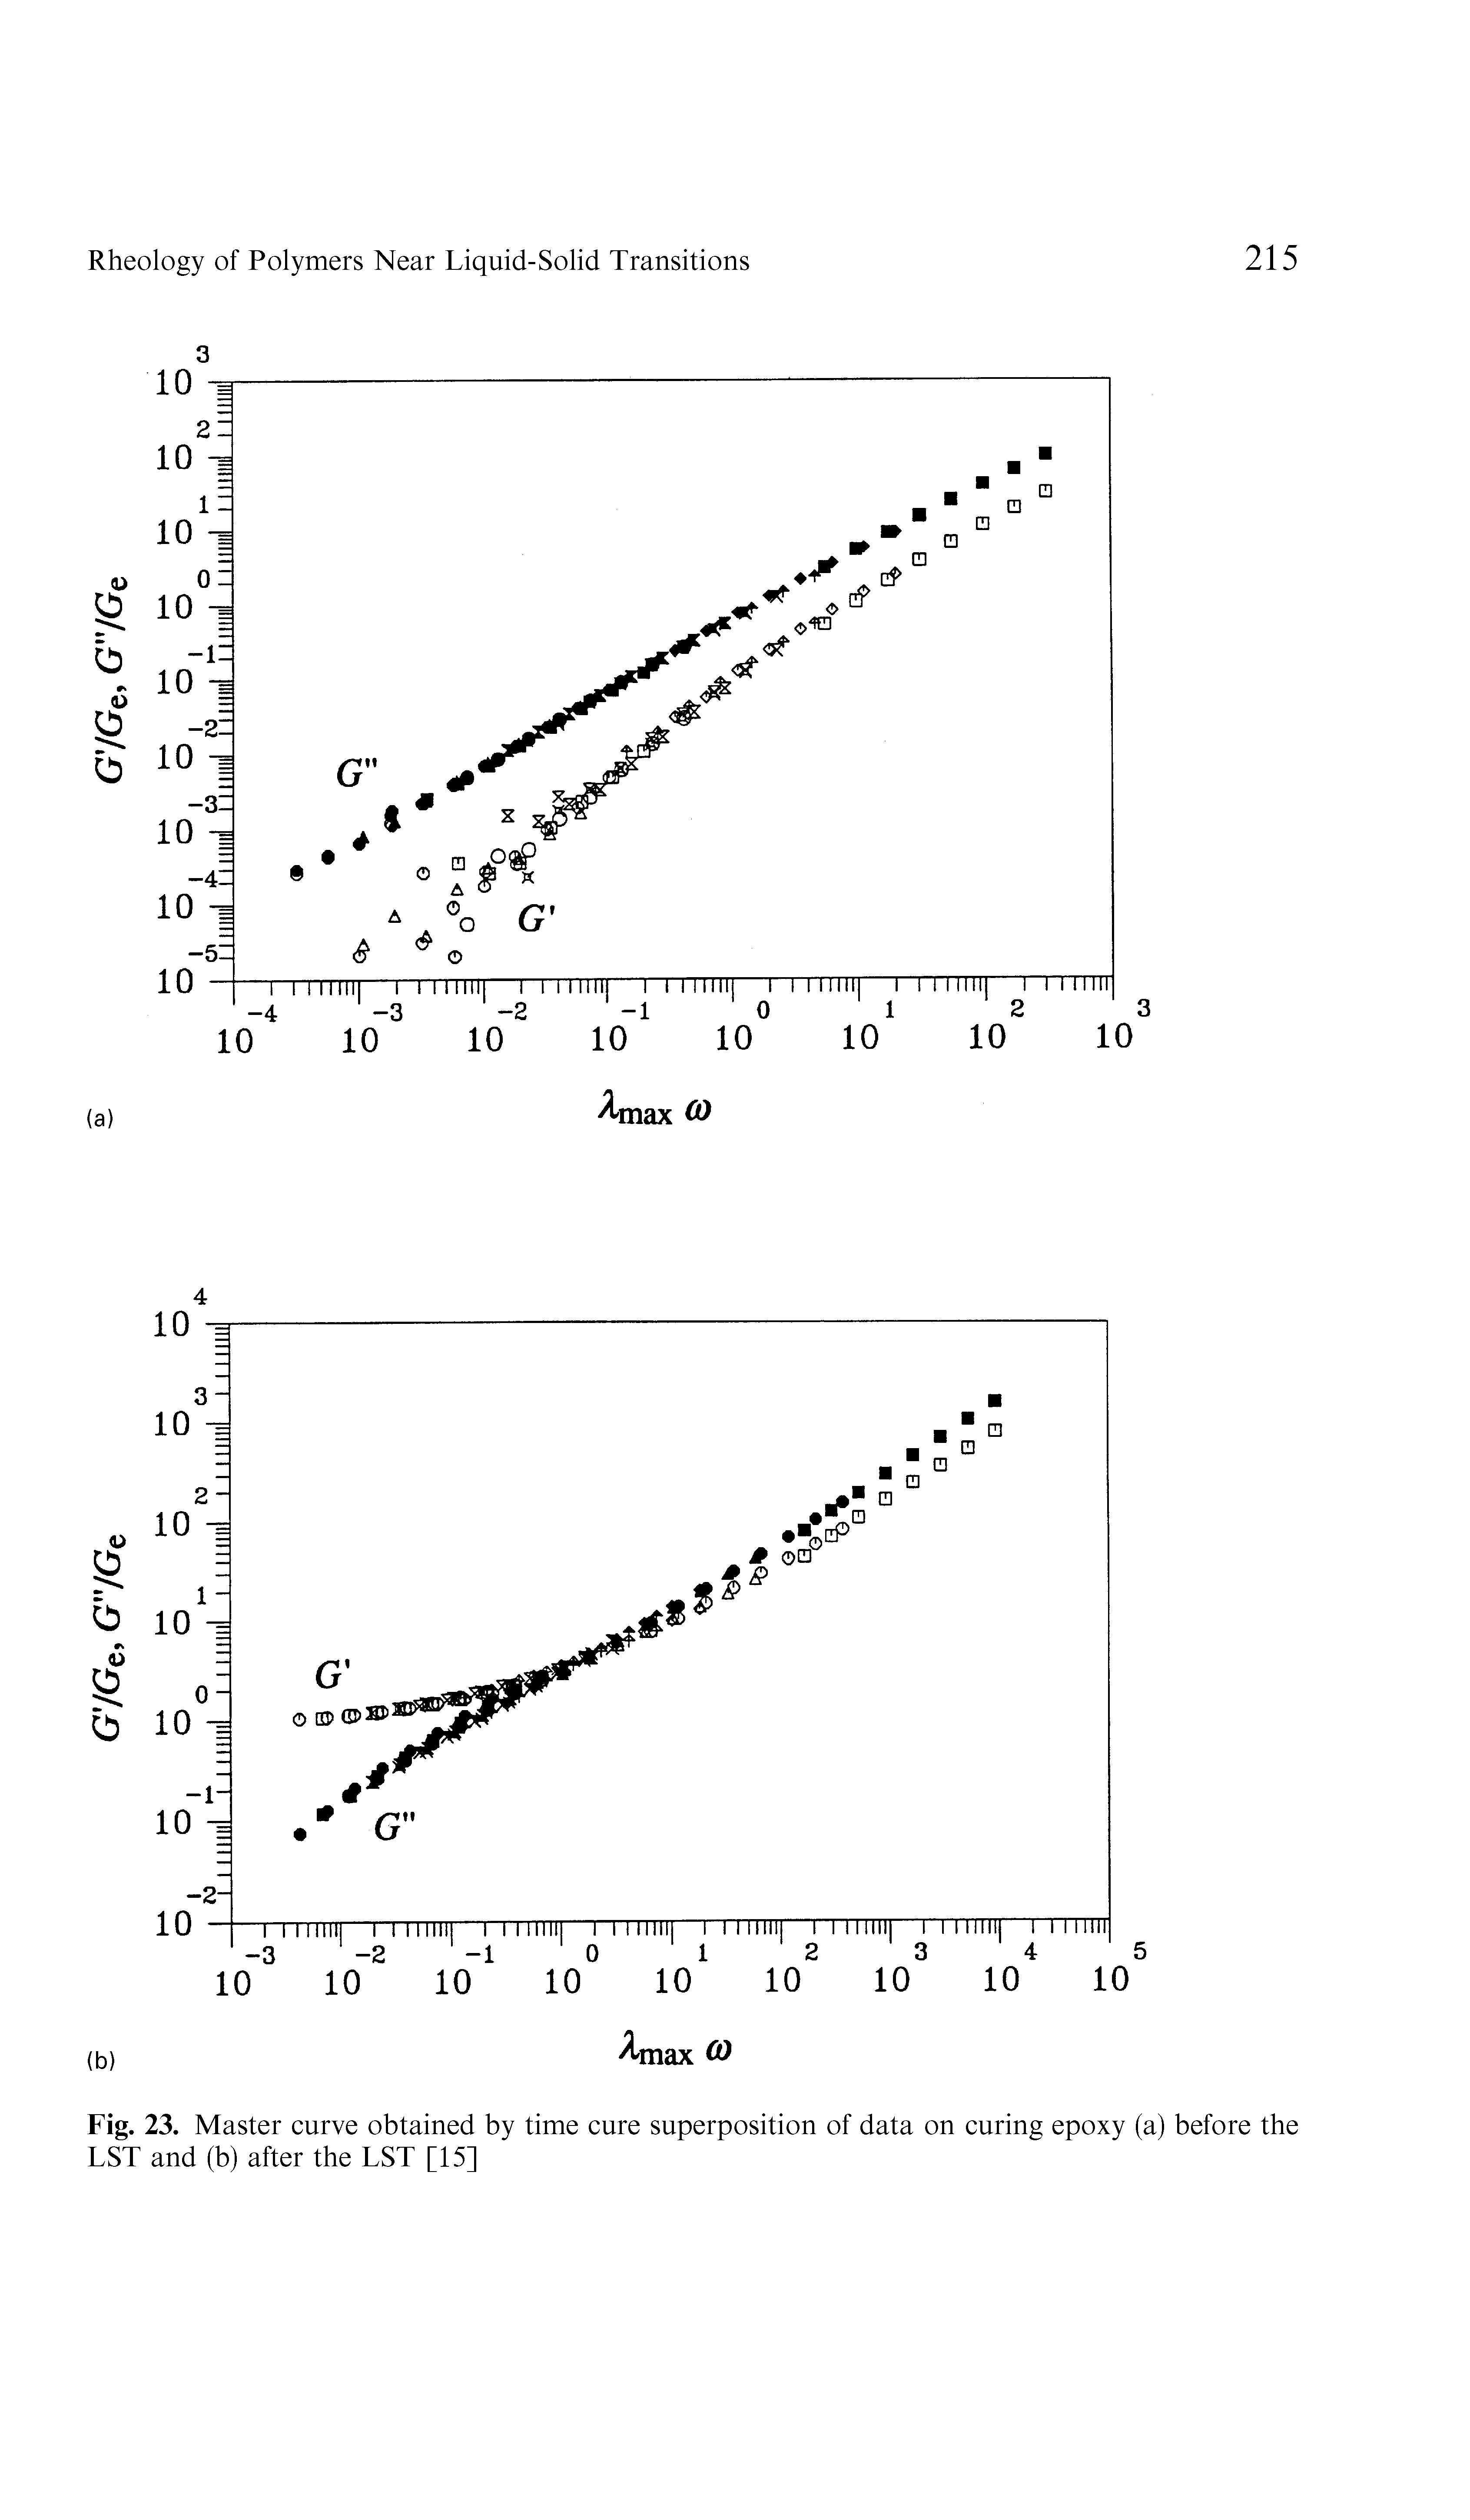 Fig. 23. Master curve obtained by time cure superposition of data on curing epoxy (a) before the LST and (b) after the LST [15]...